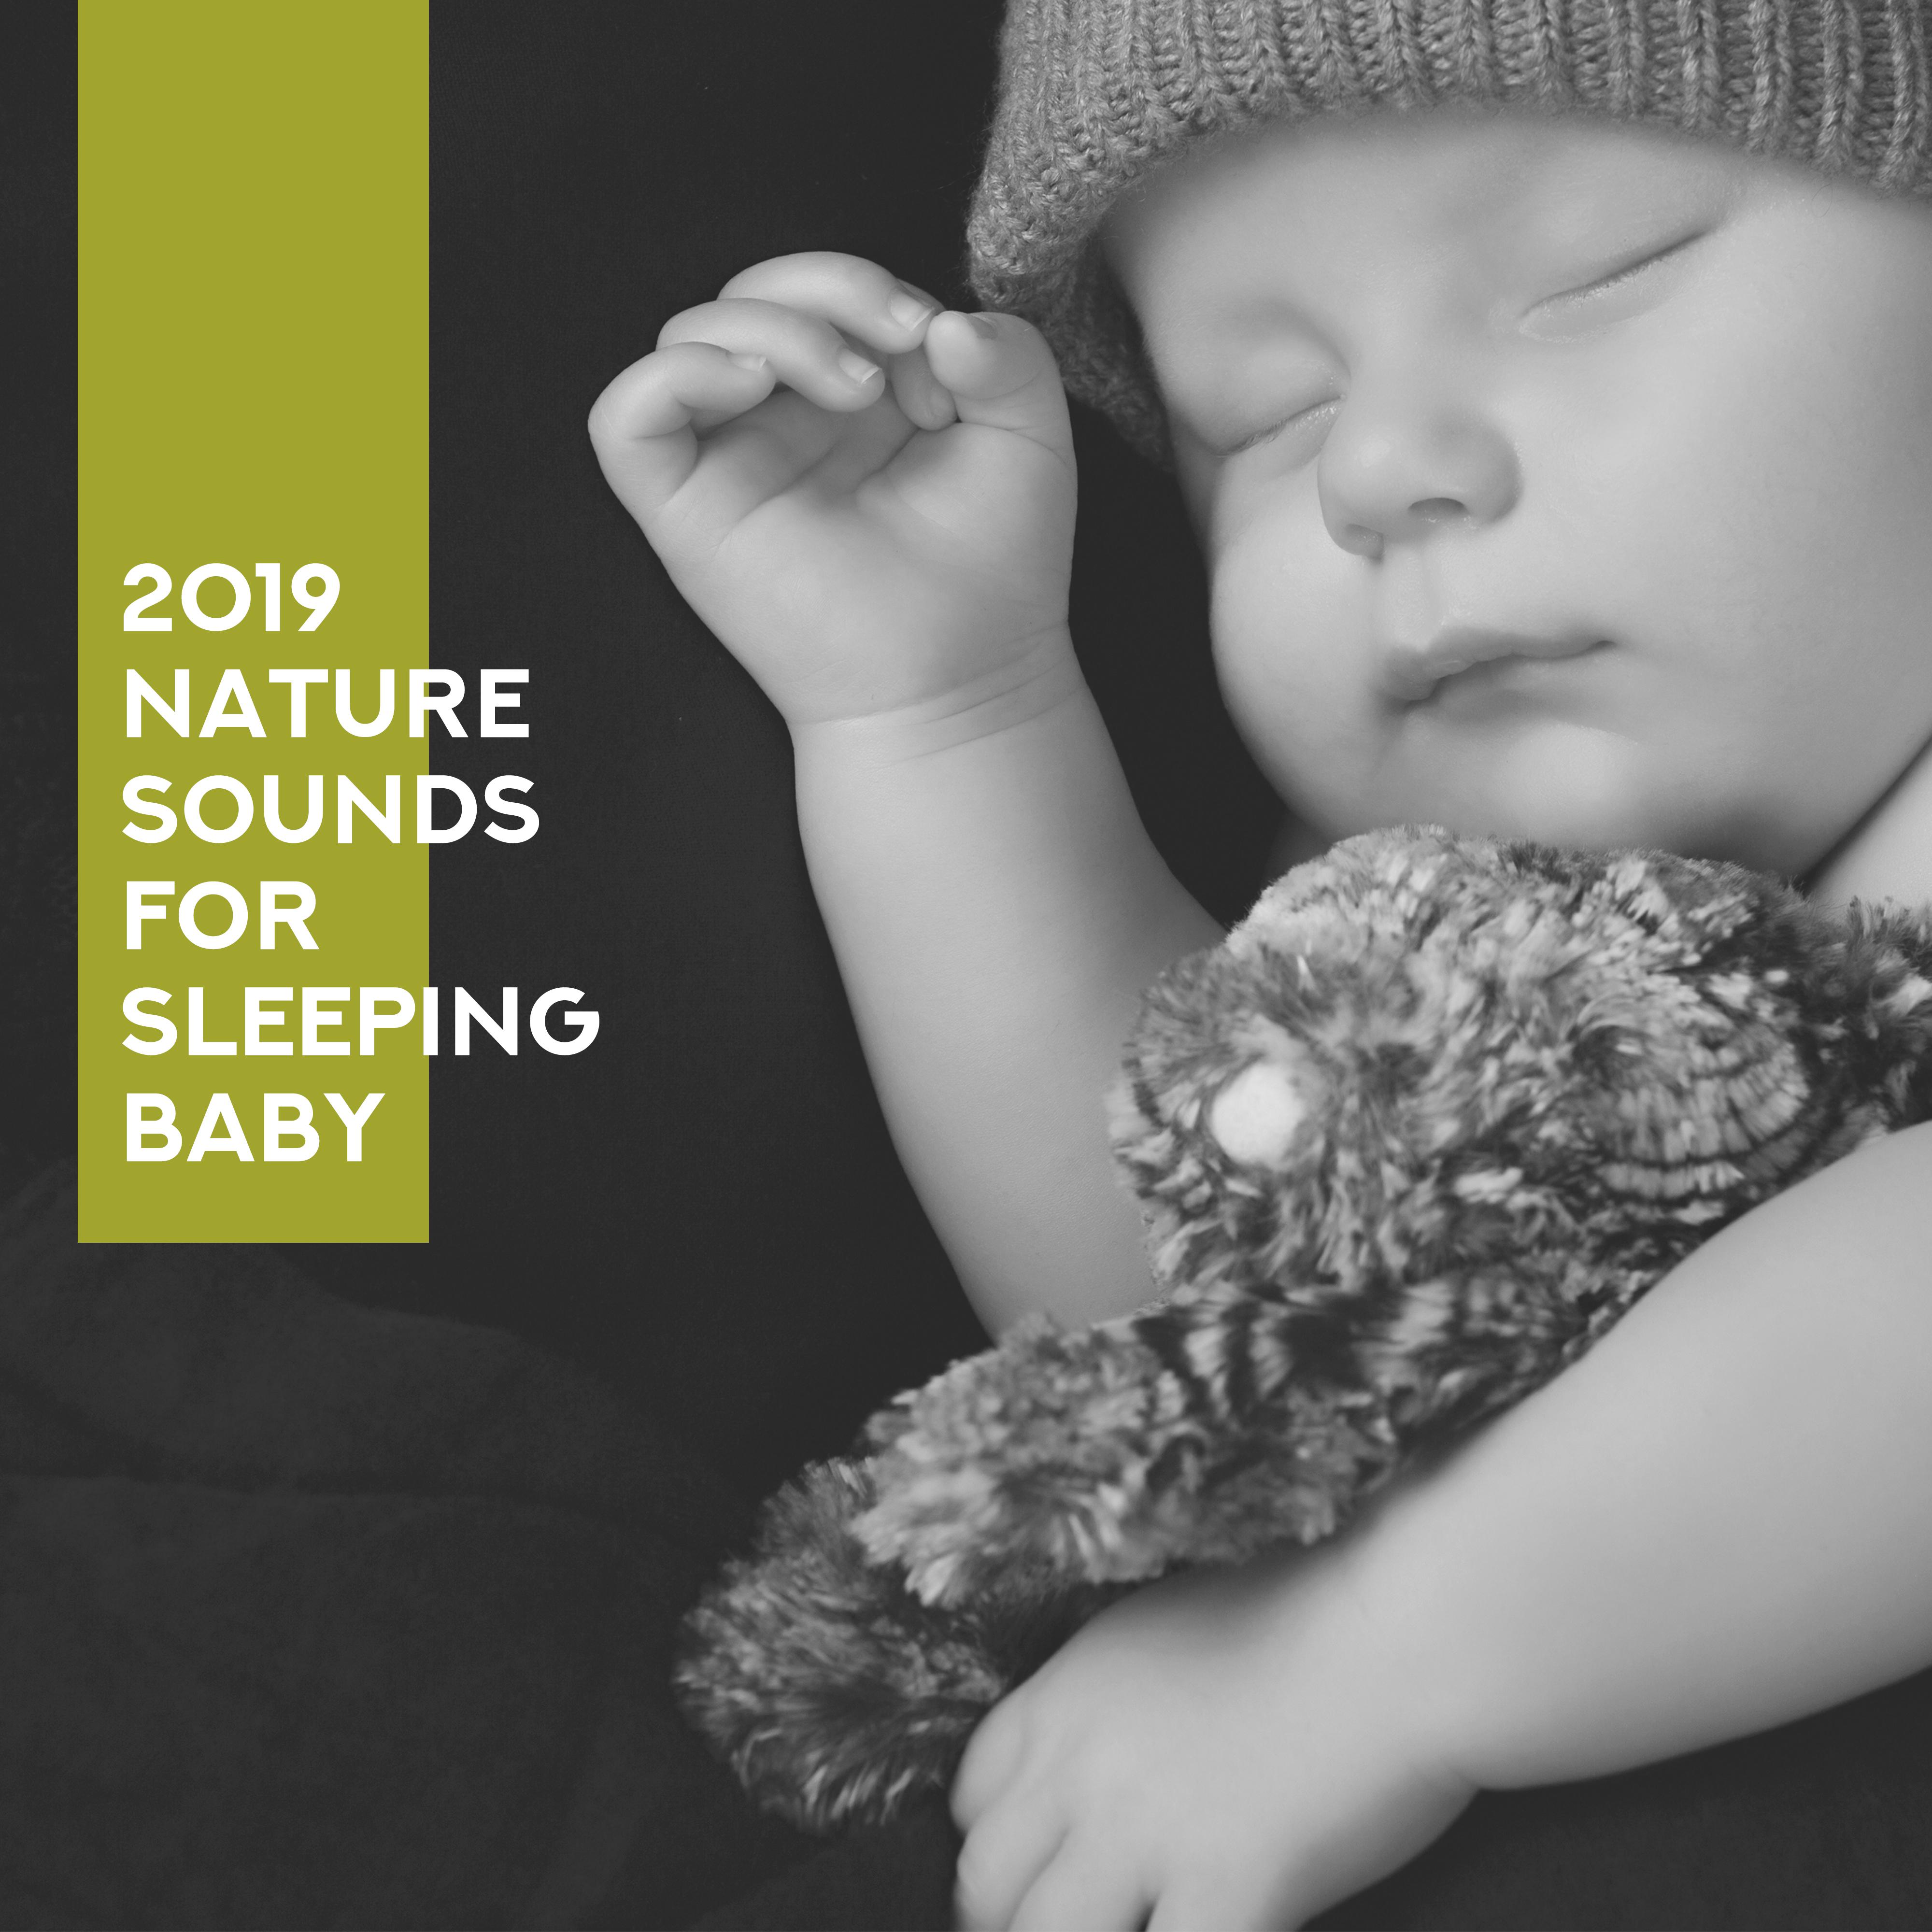 2019 Nature Sounds for Sleeping Baby: Bedtime Baby, Sleeping Songs, Healing Music for Insomnia, Relaxing Lullabies for Kids, Baby Music at Night, Nature Music